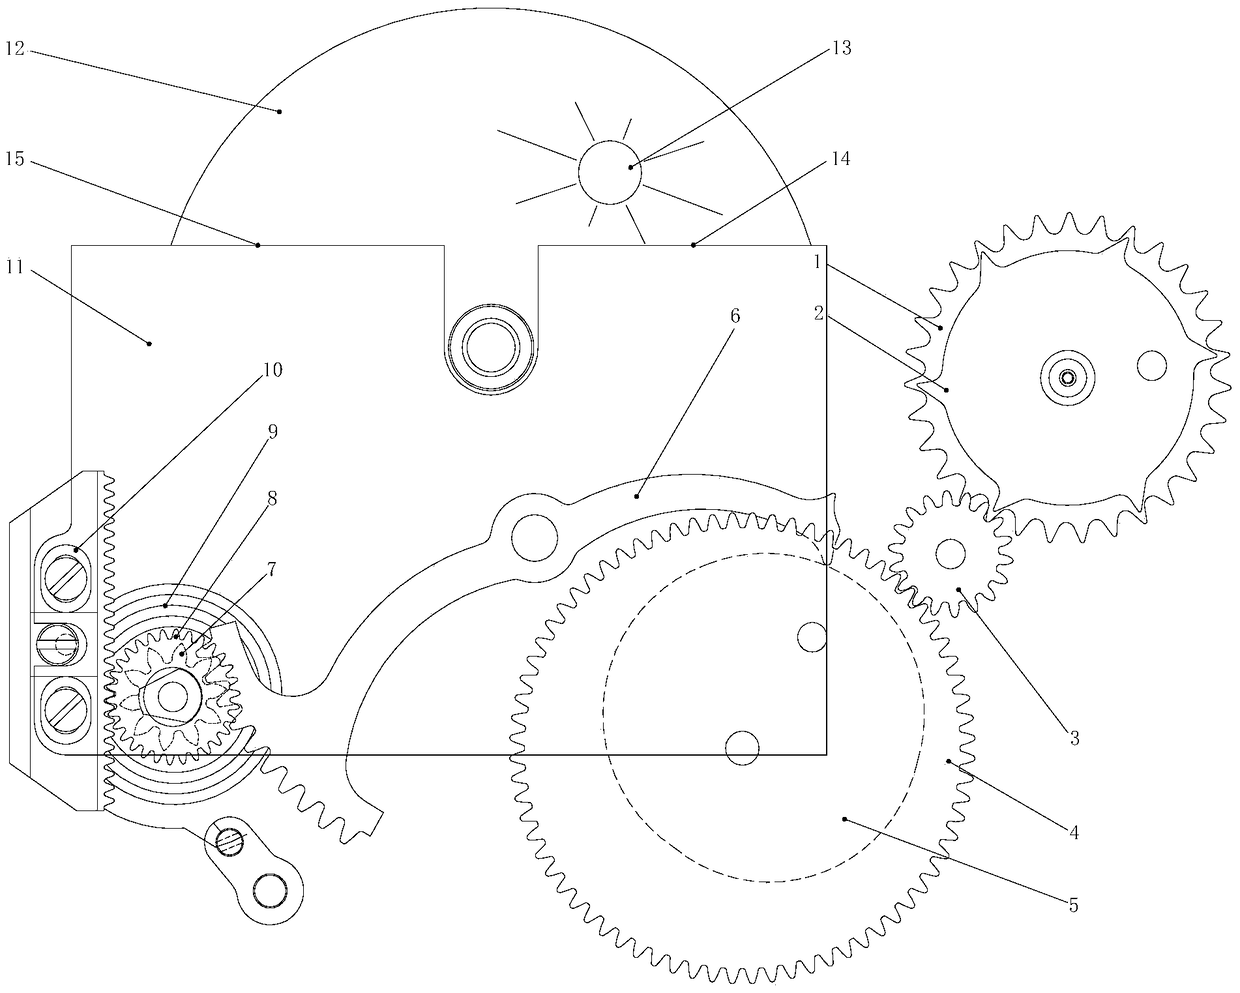 Sun azimuth and sunrise/sunset display mechanism for a watch